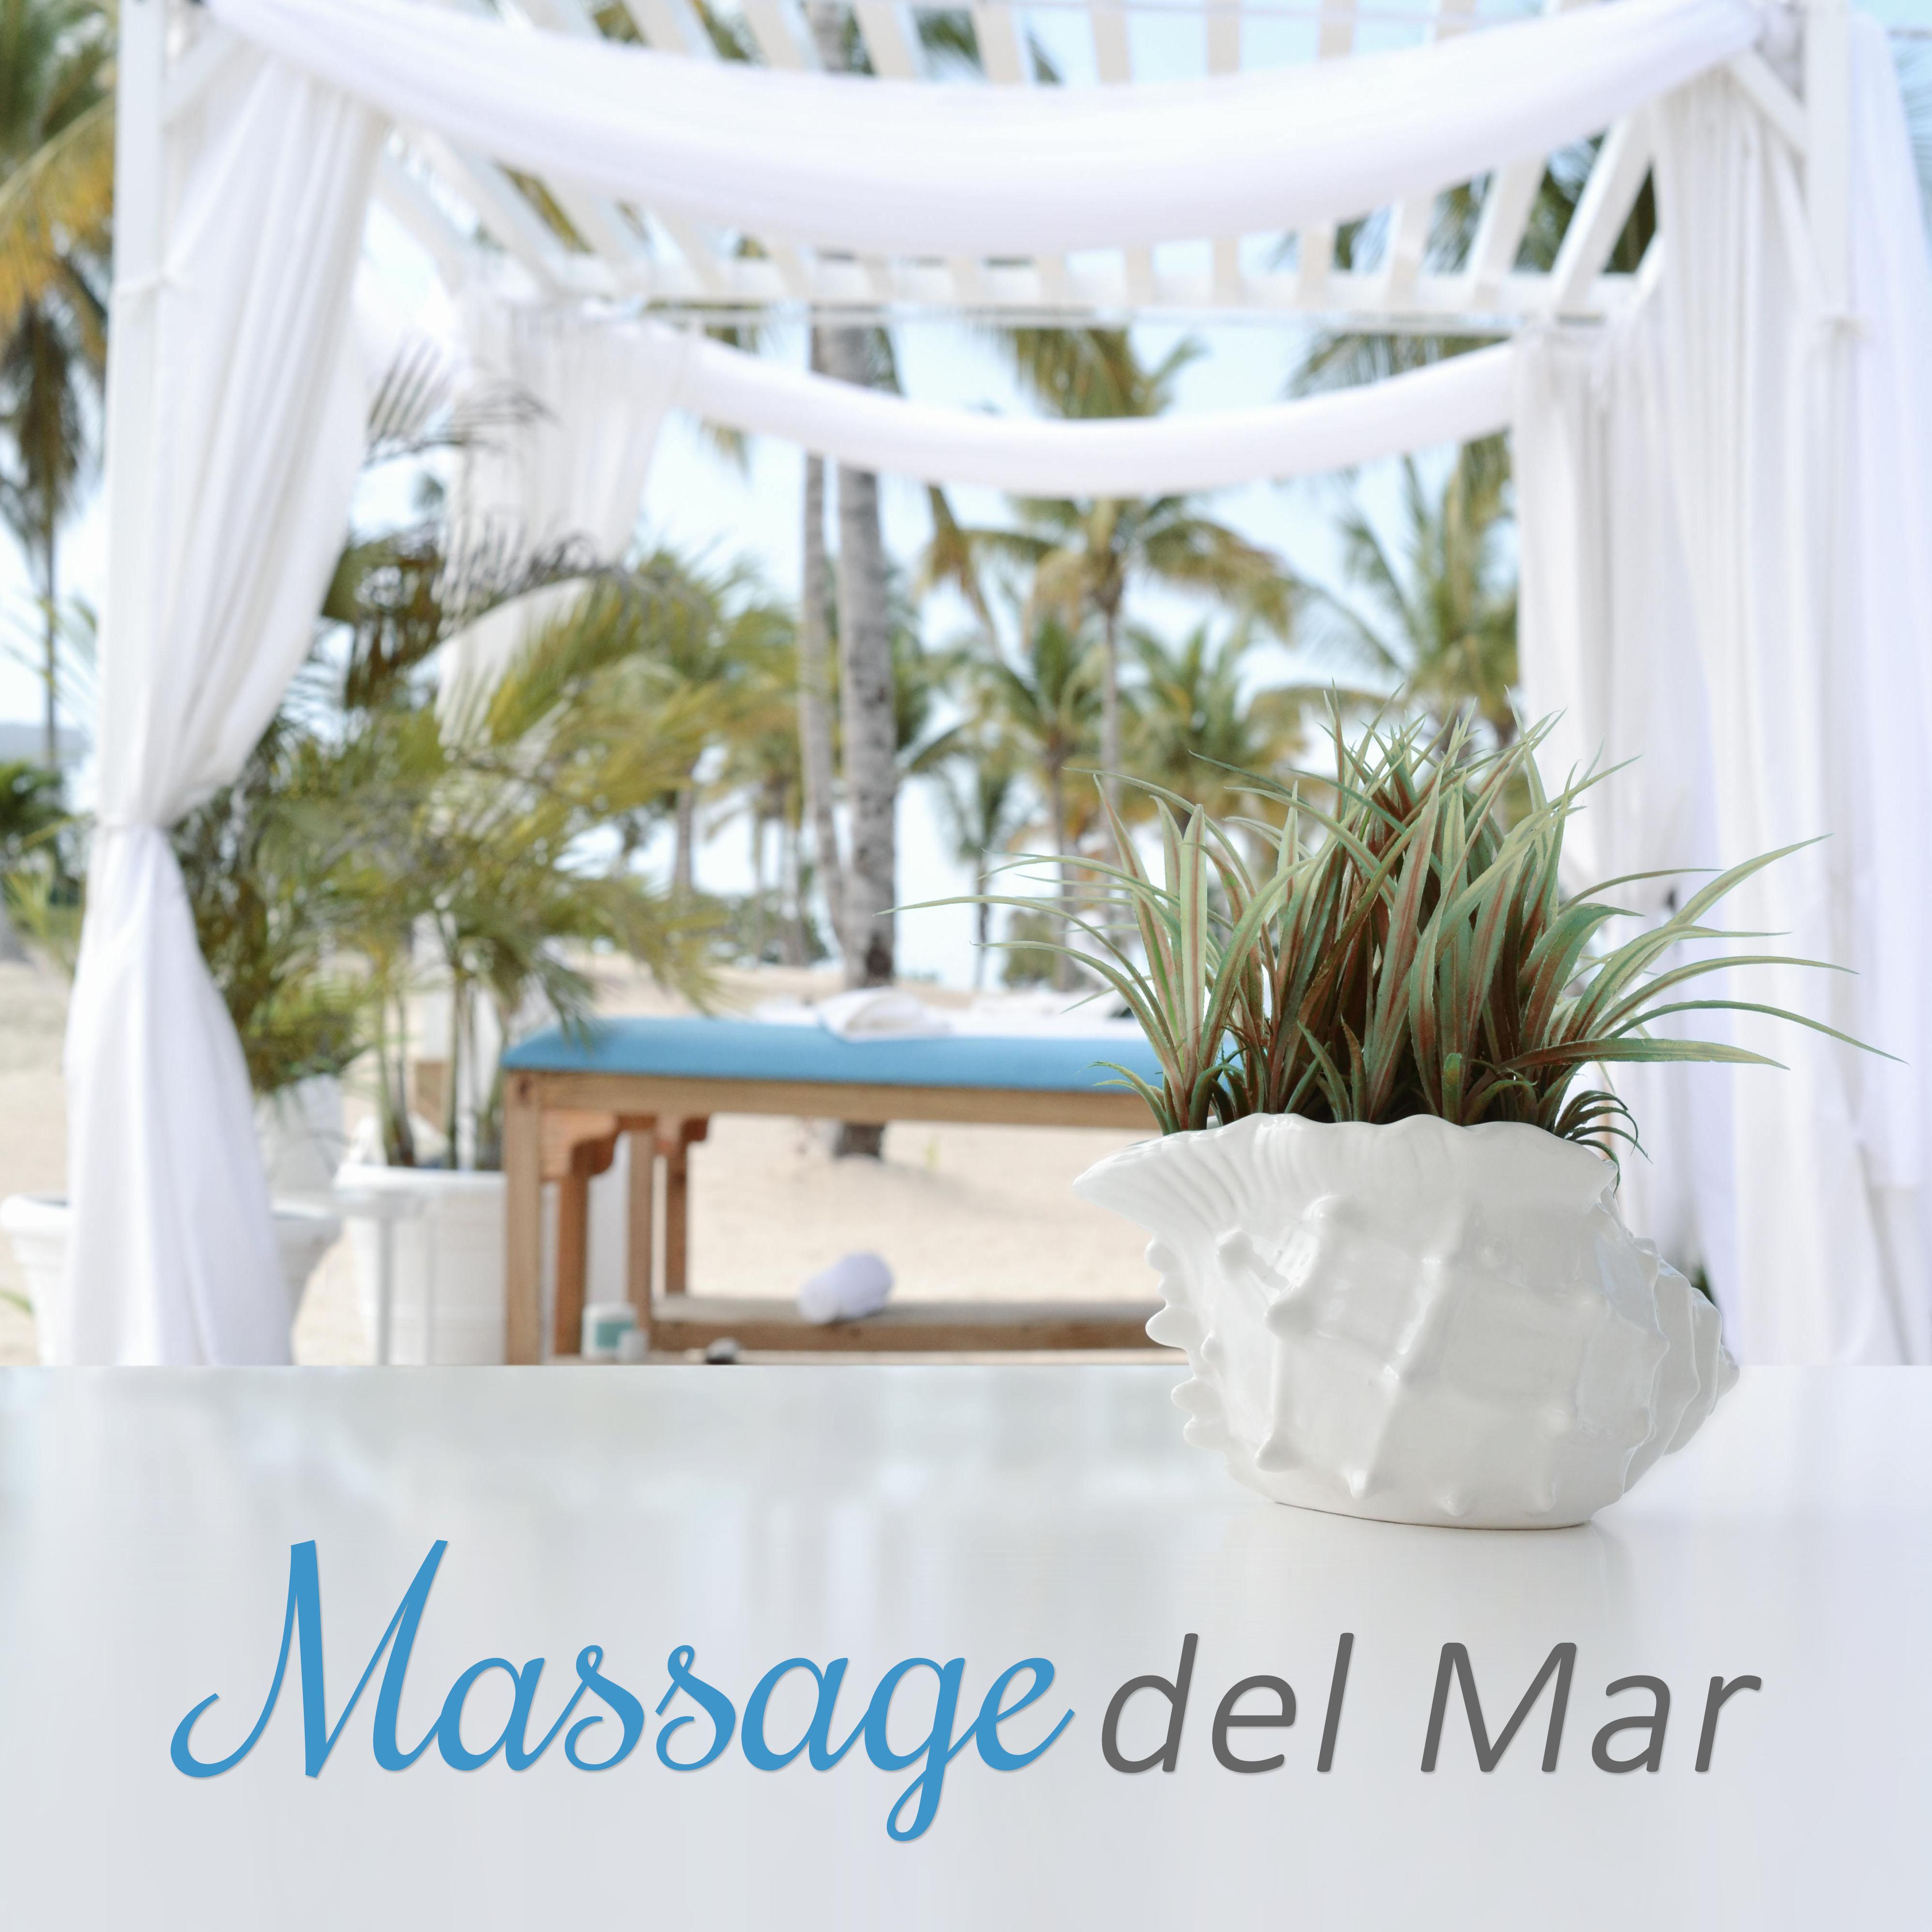 Massage del Mar – Soothing Sounds for Rest, Healing by Touch, Sensual Massage